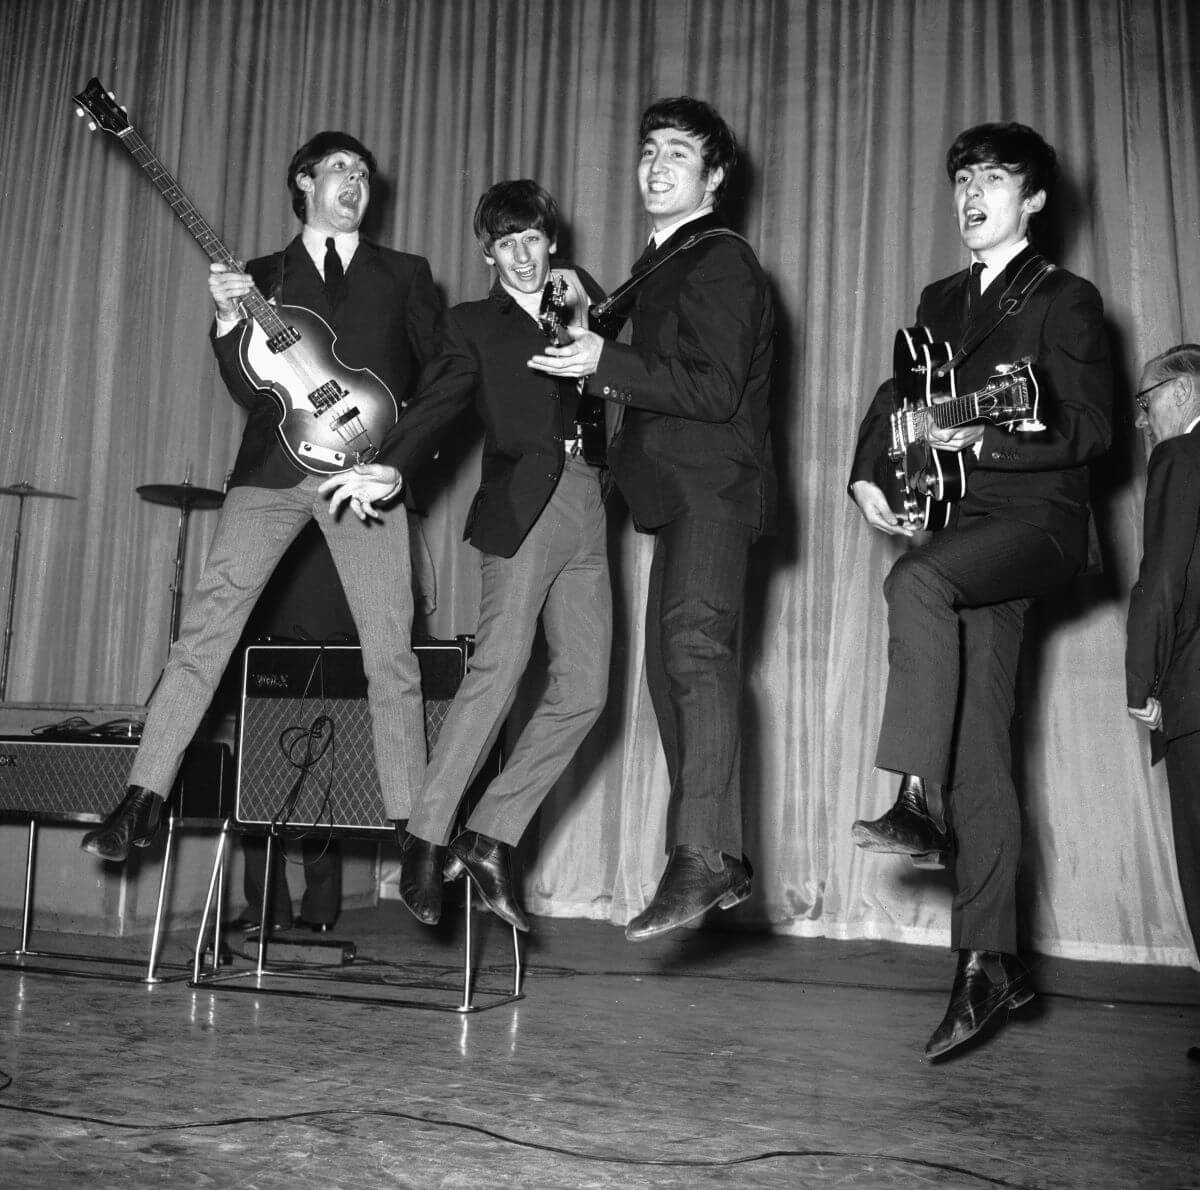 A black and white picture of Paul McCartney, Ringo Starr, John Lennon, and George Harrison of The Beatles jumping in the air.